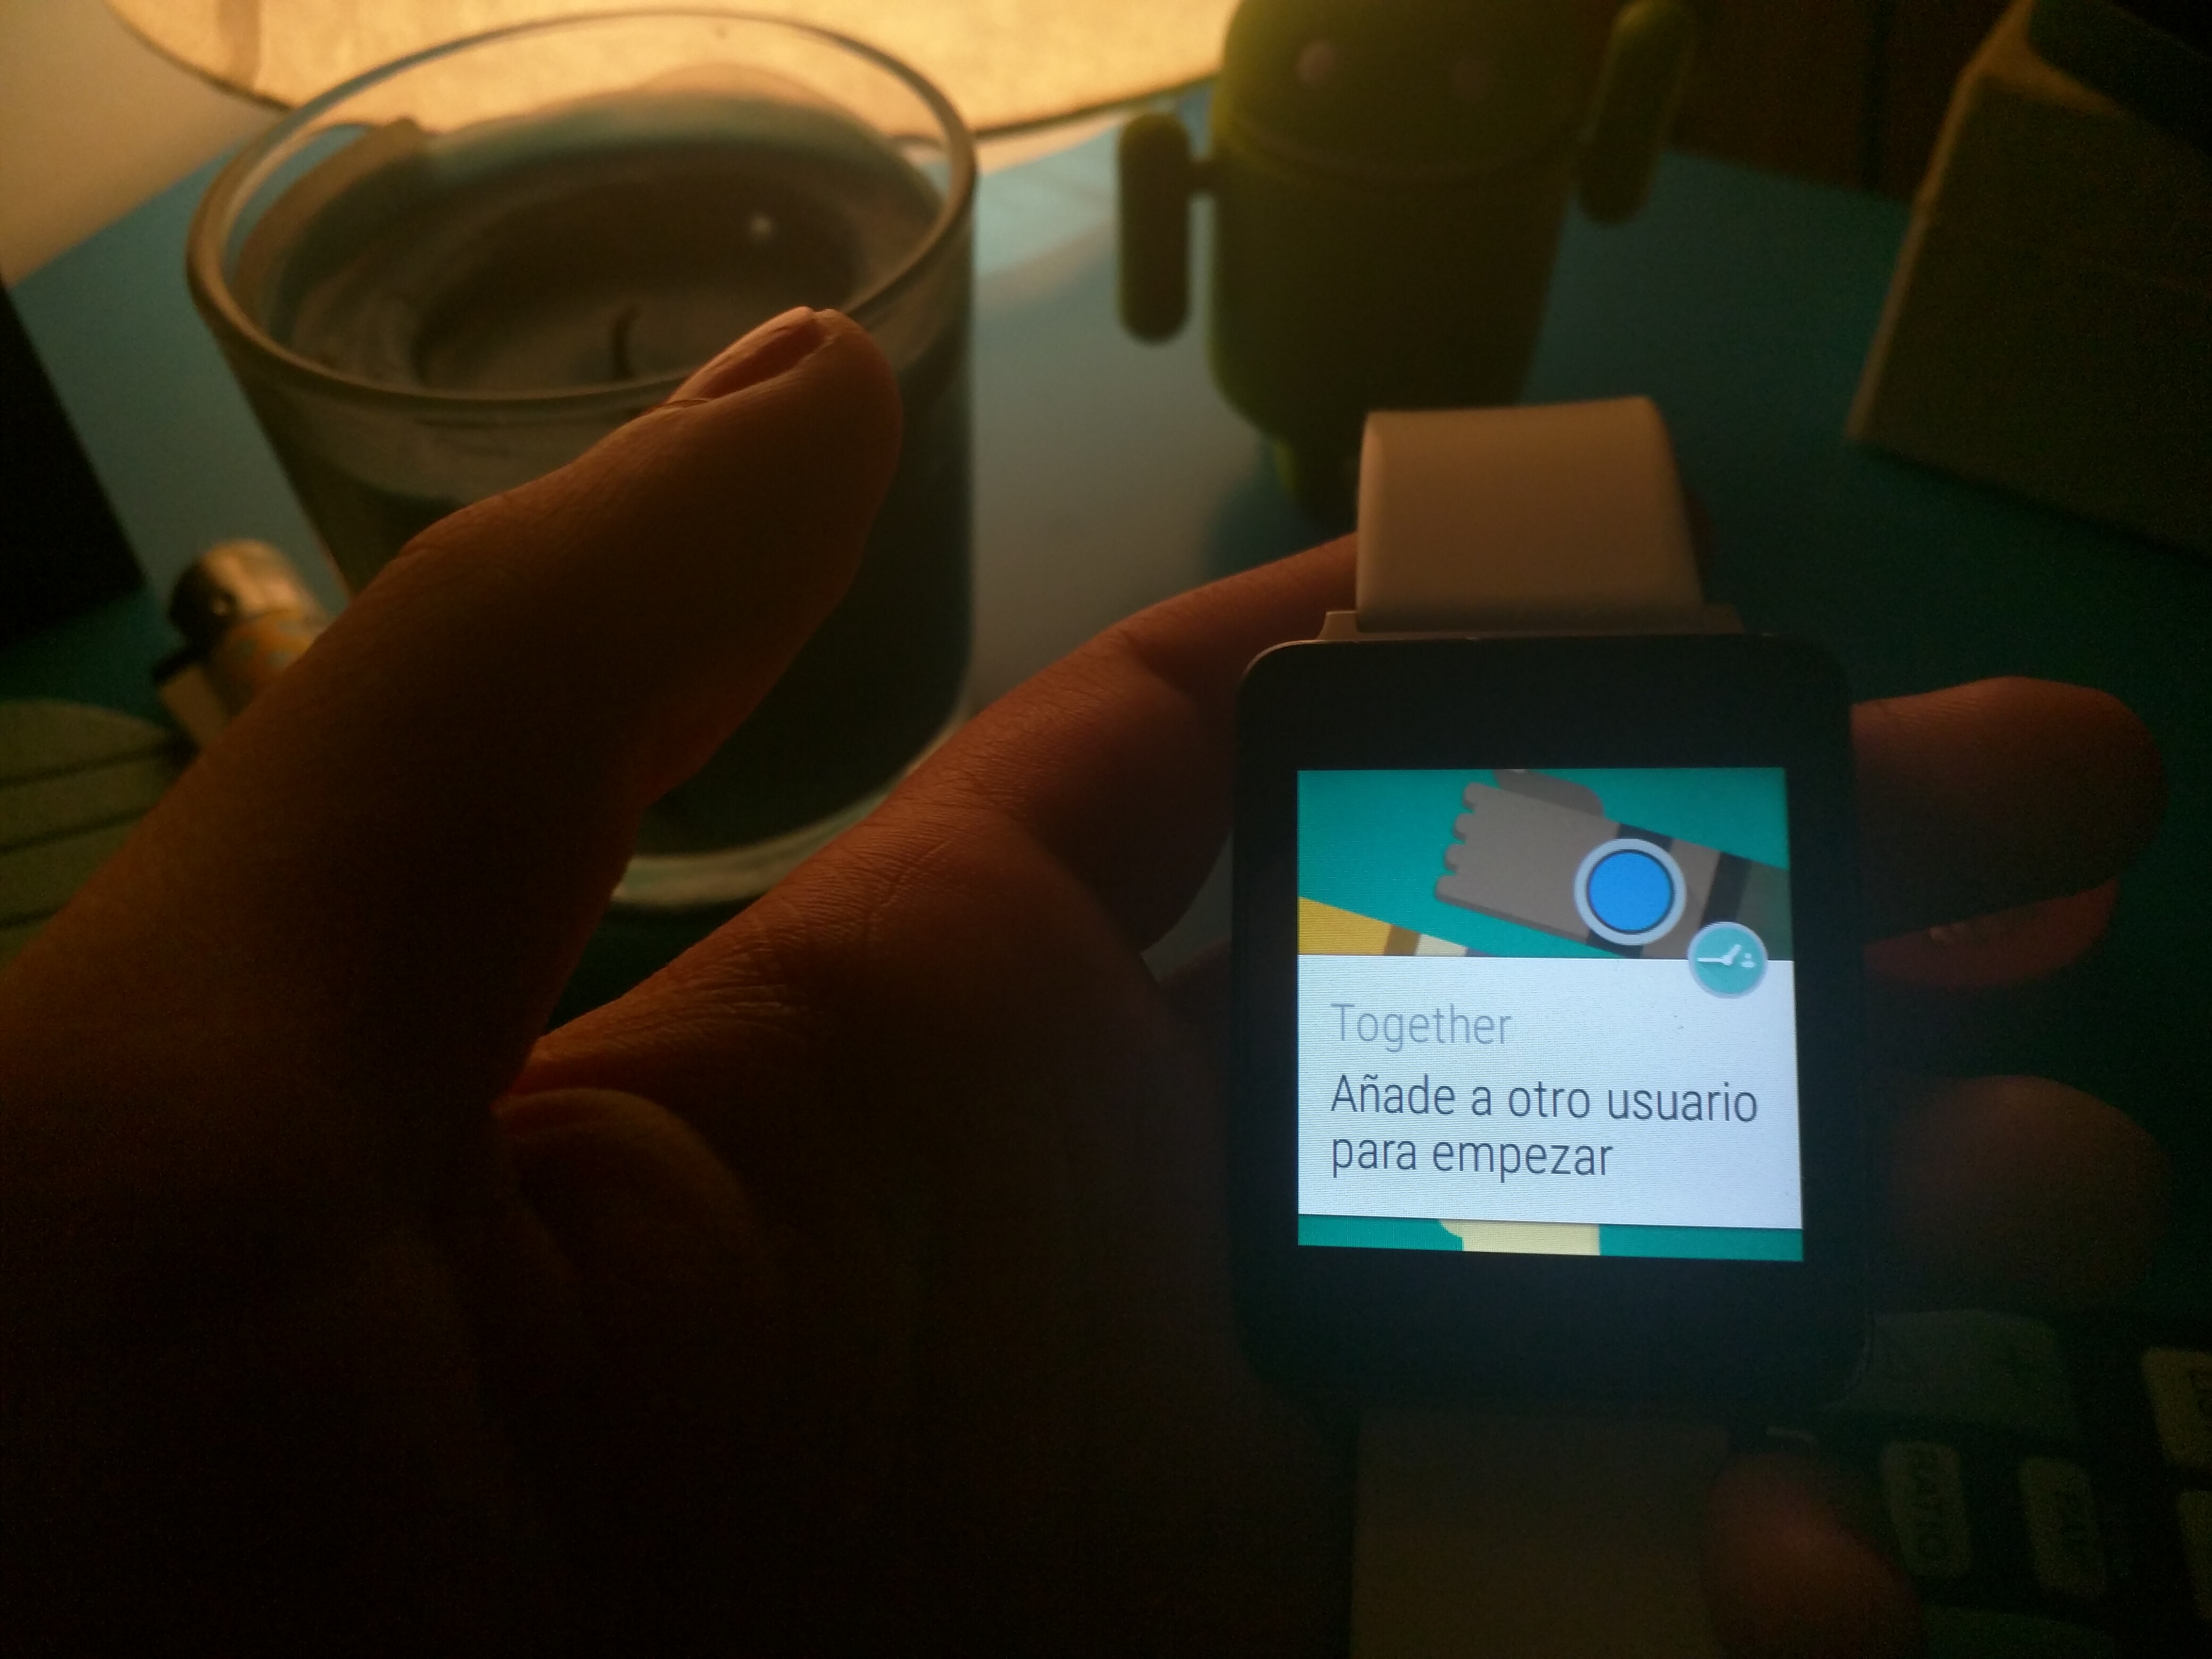 together android wear 1.3